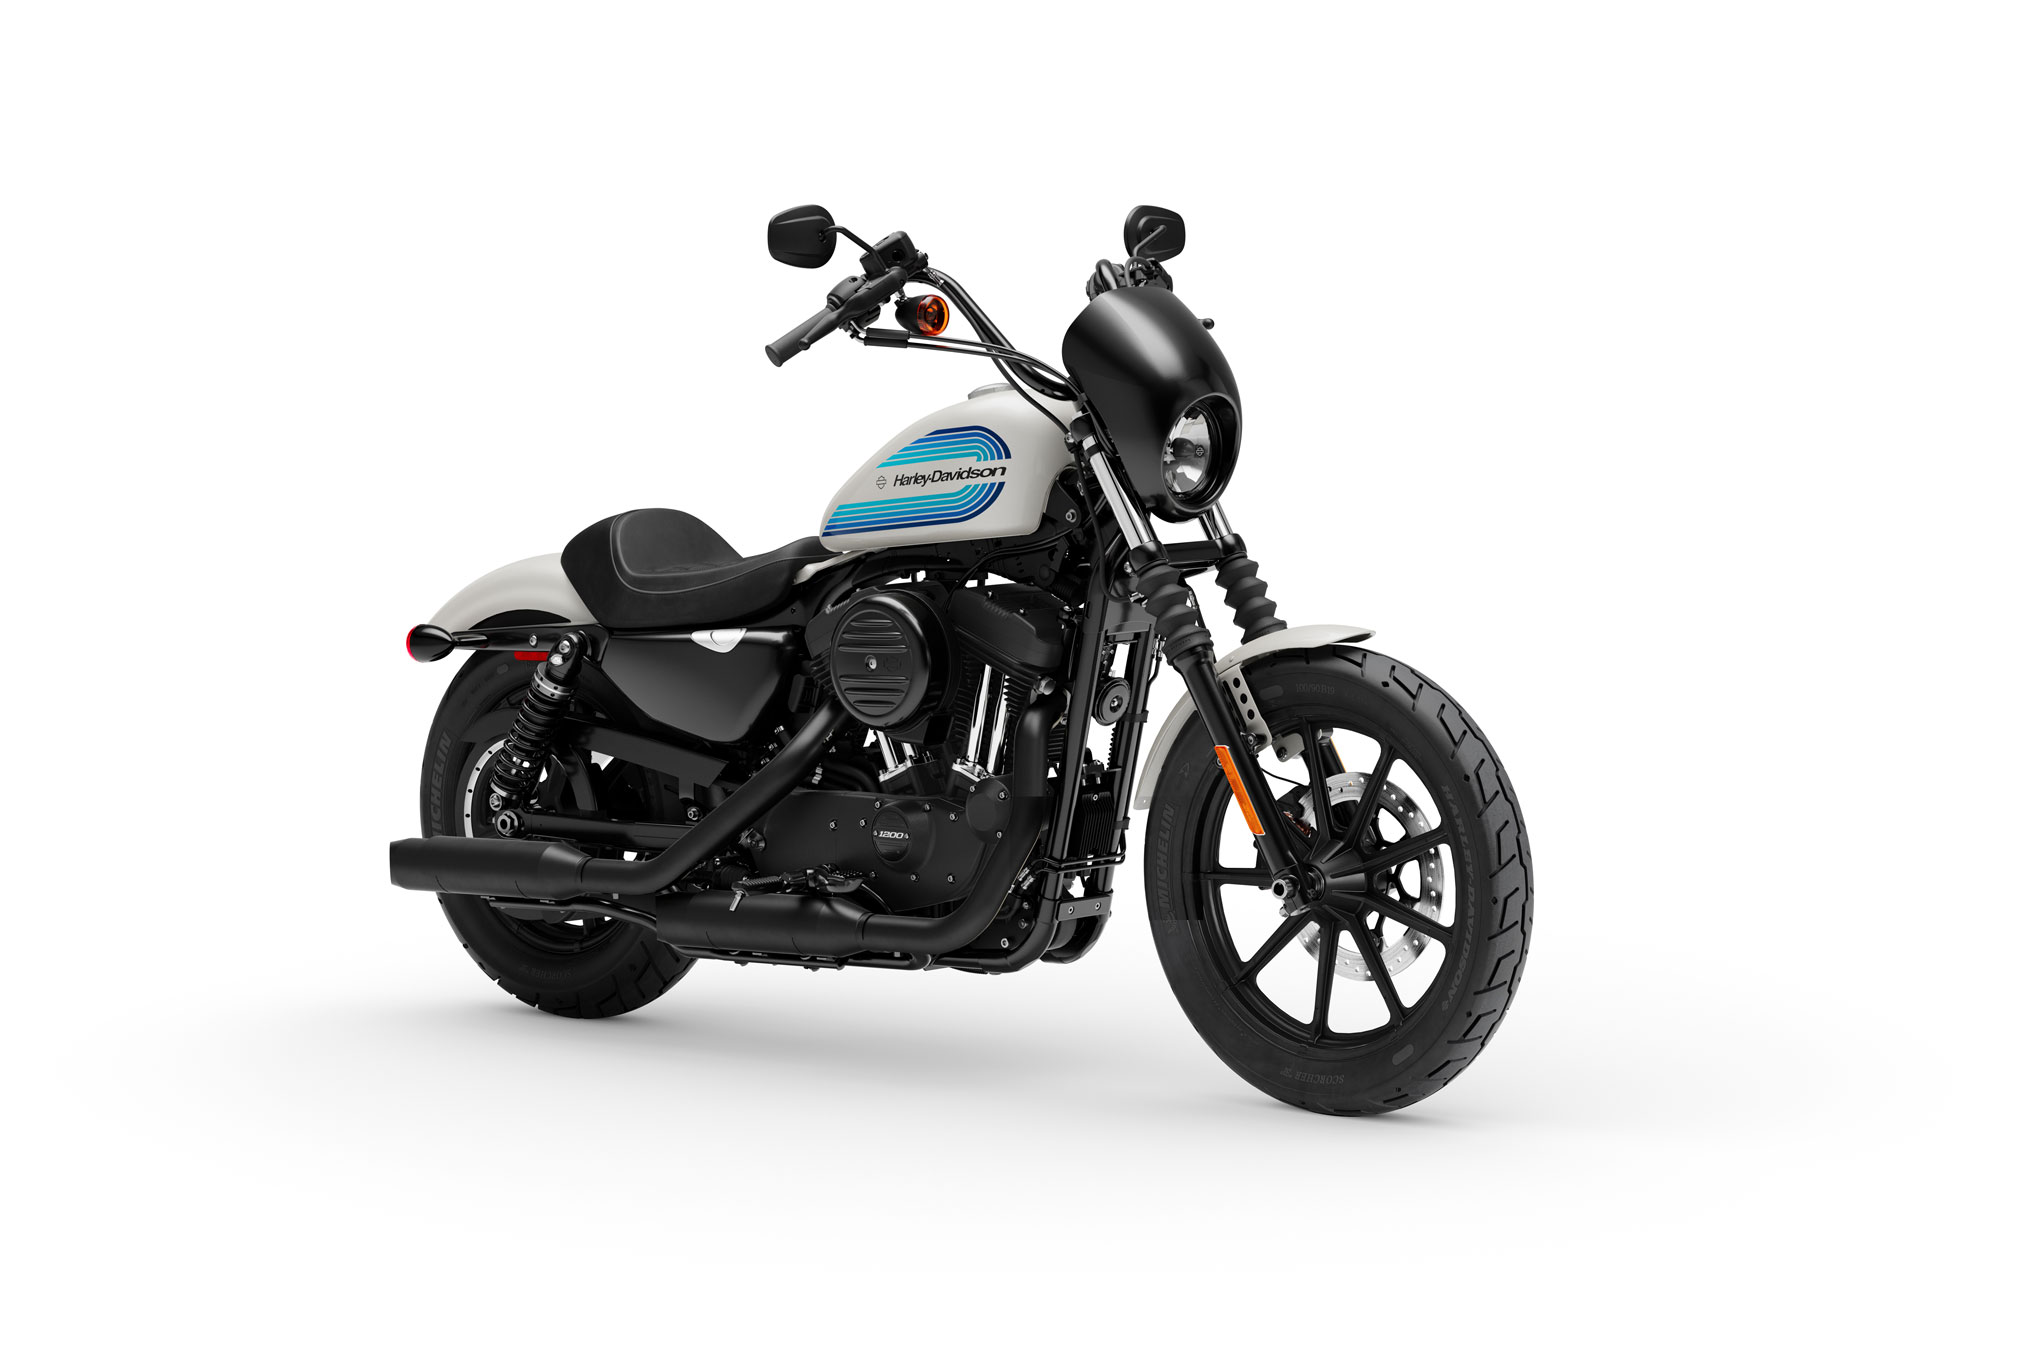 2020 Harley Davidson Iron 1200 Review Outstanding Sportster